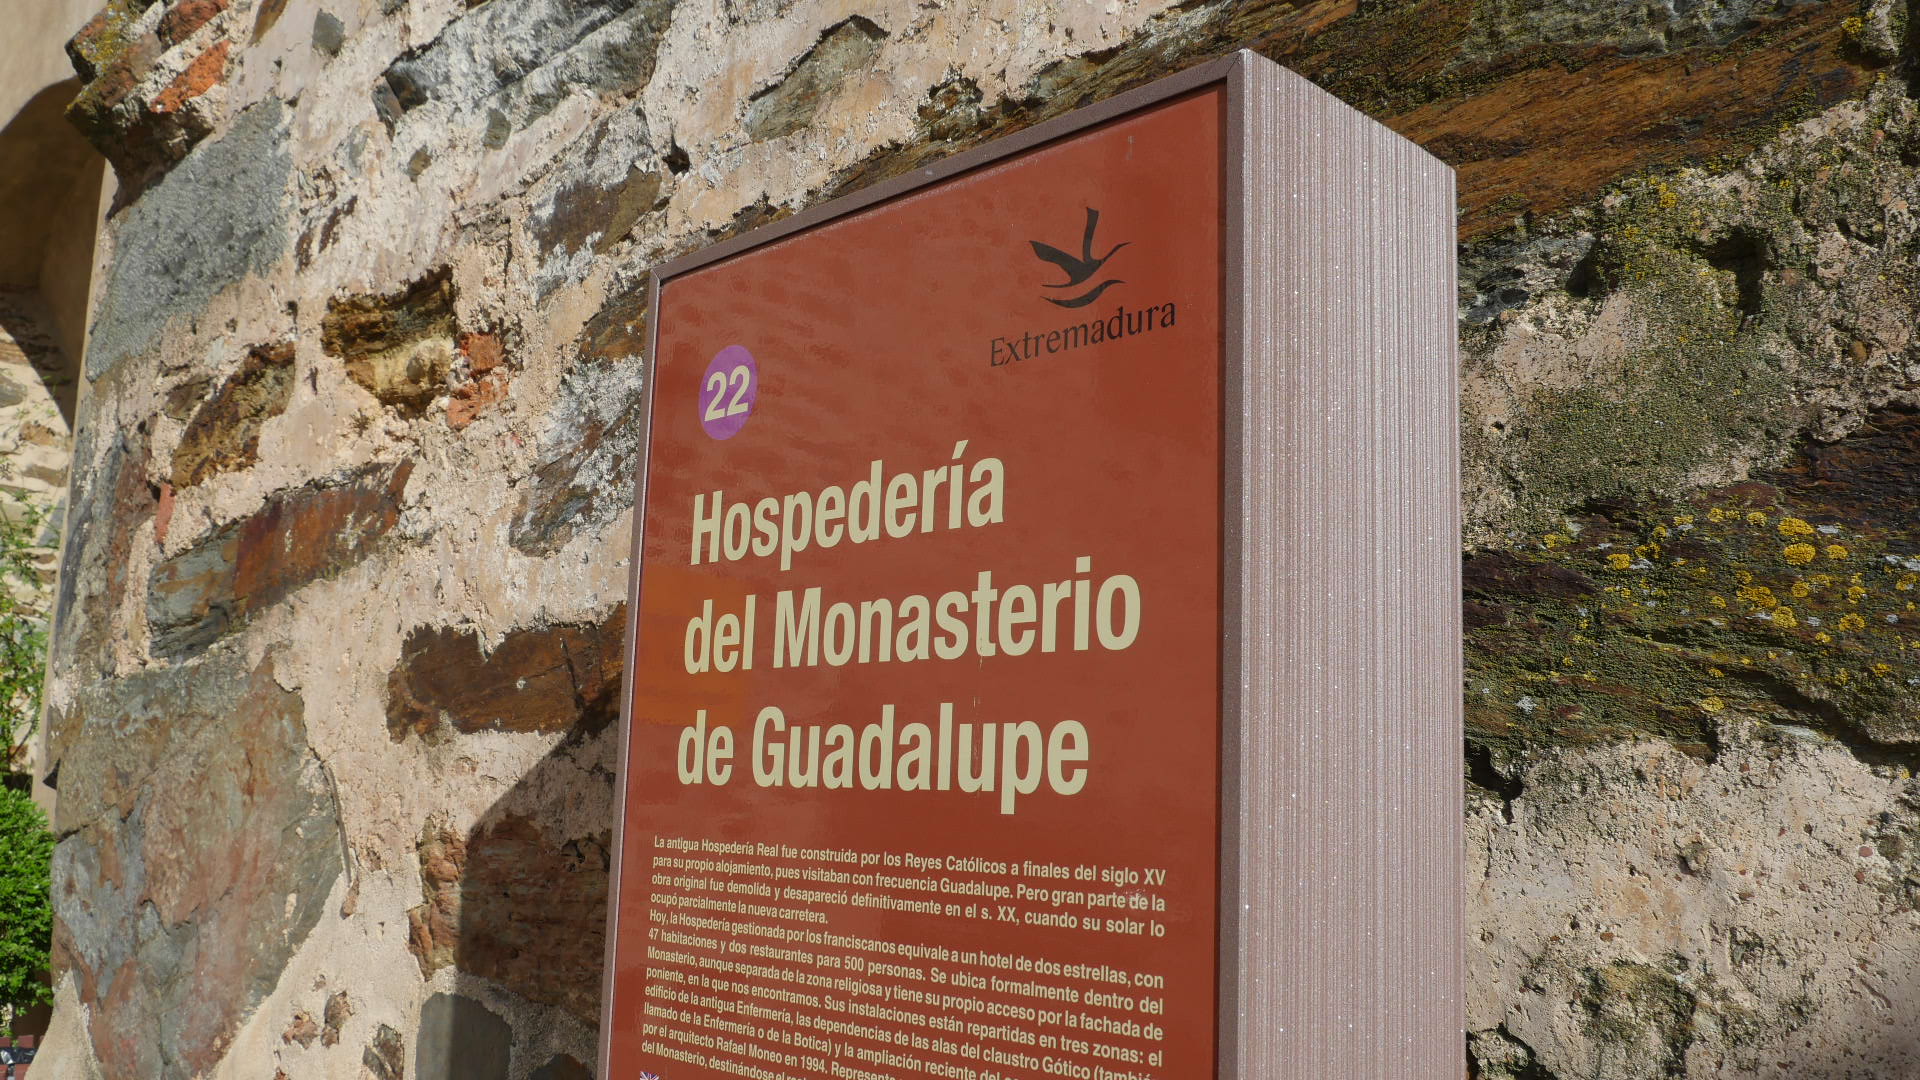 Photo of a sign that tells about the Monastery at Our Lady of Guadalupe, in Extremadura Spain.